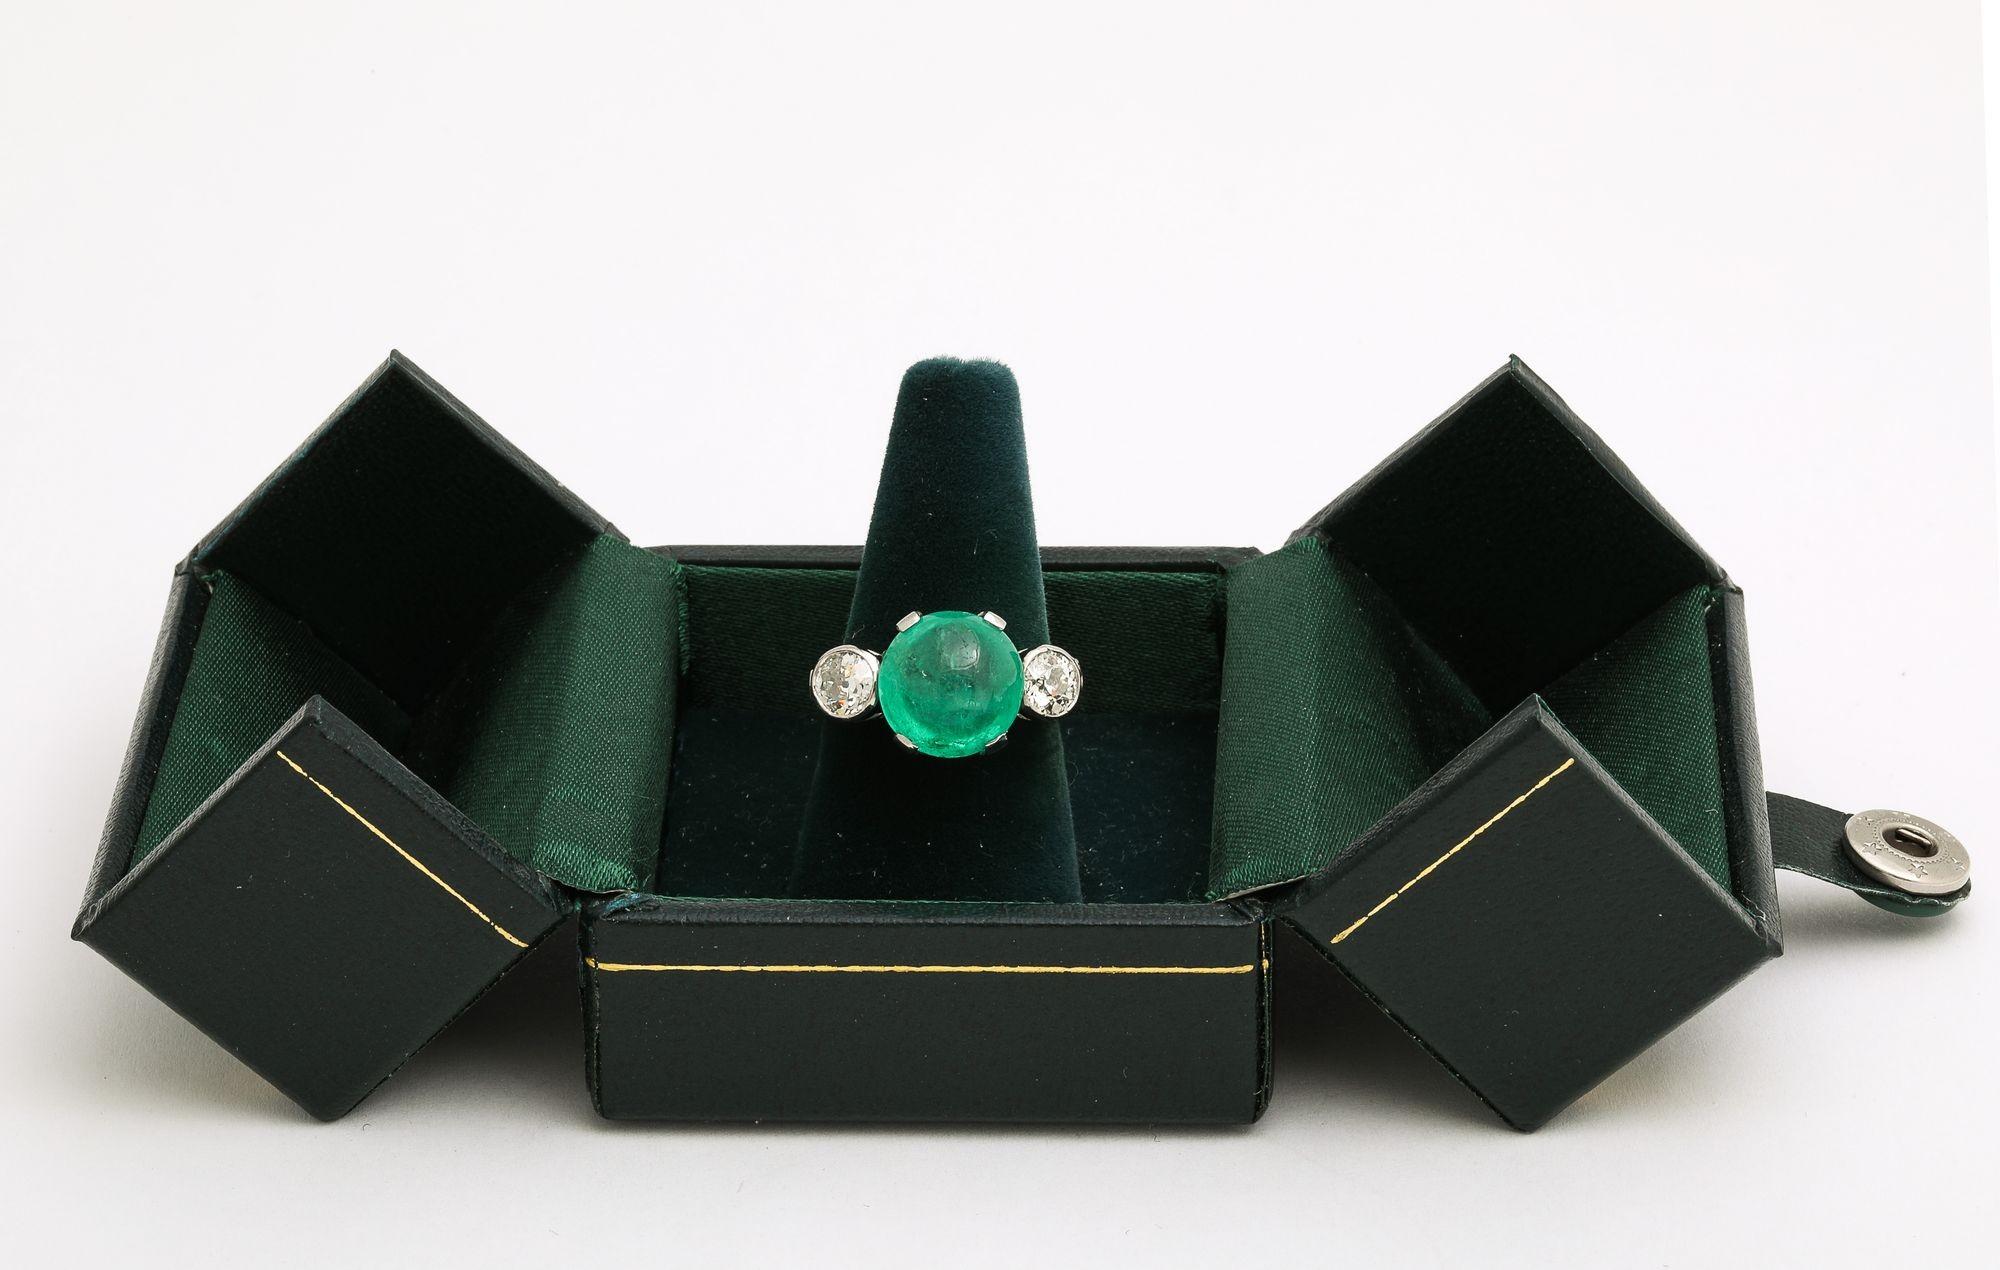 A very fine Vintage Art Deco 6 ct Certified Natural Columbian Emerald Cabochon and Diamond Platinum Engagement Ring. A stunning emerald stone is flanked by two dazzling bezel set diamonds on a unobtrusive platinum band. This ring comes with an